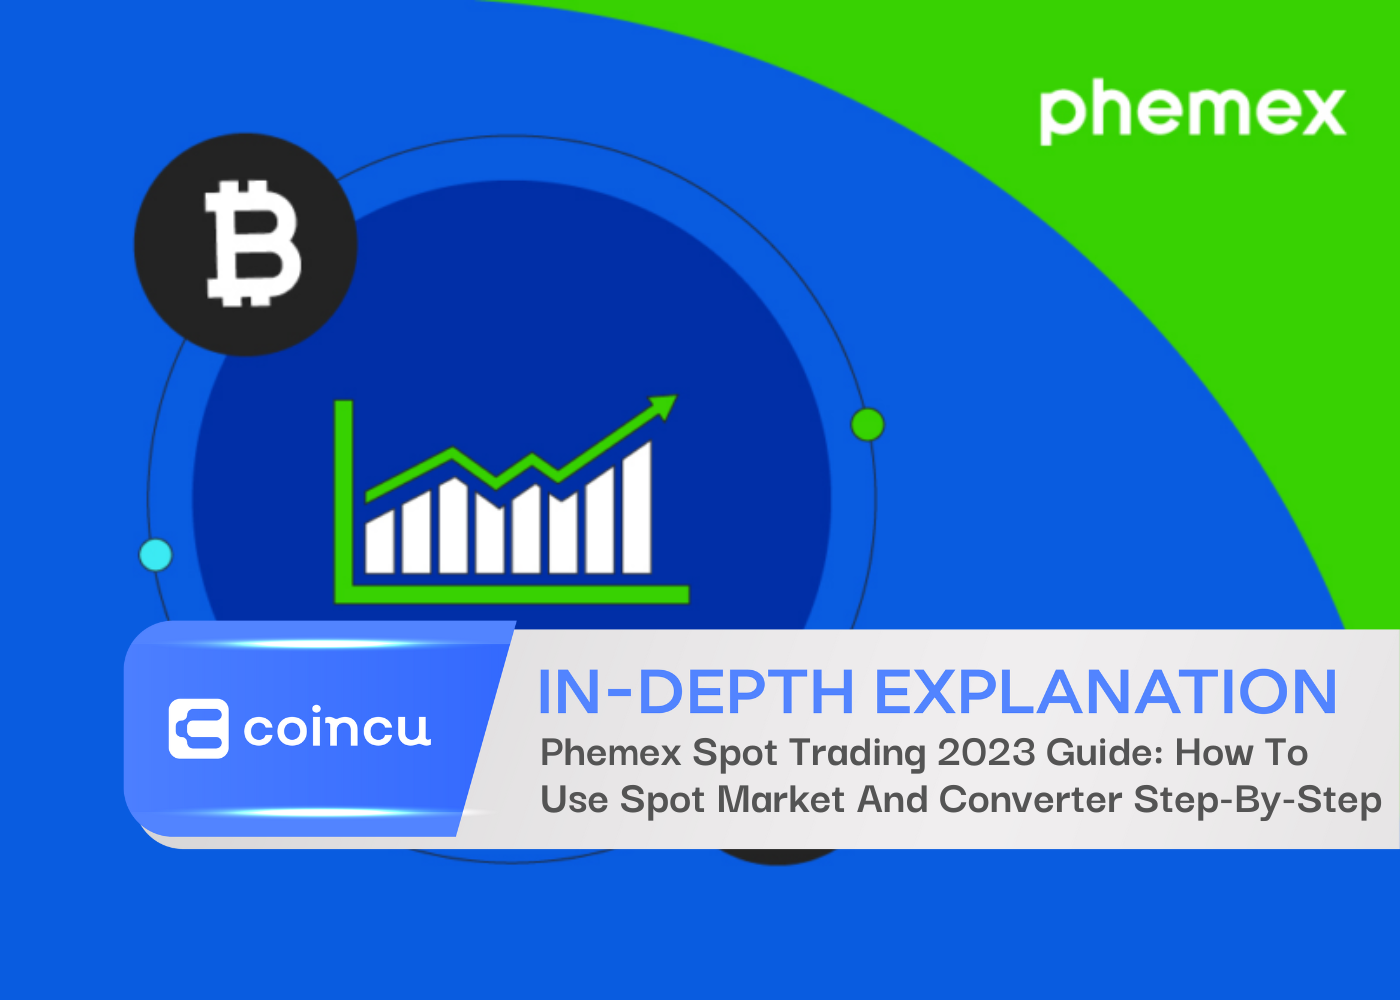 Phemex Spot Trading 2023 Guide: How To Use Spot Market And Converter Step-By-Step